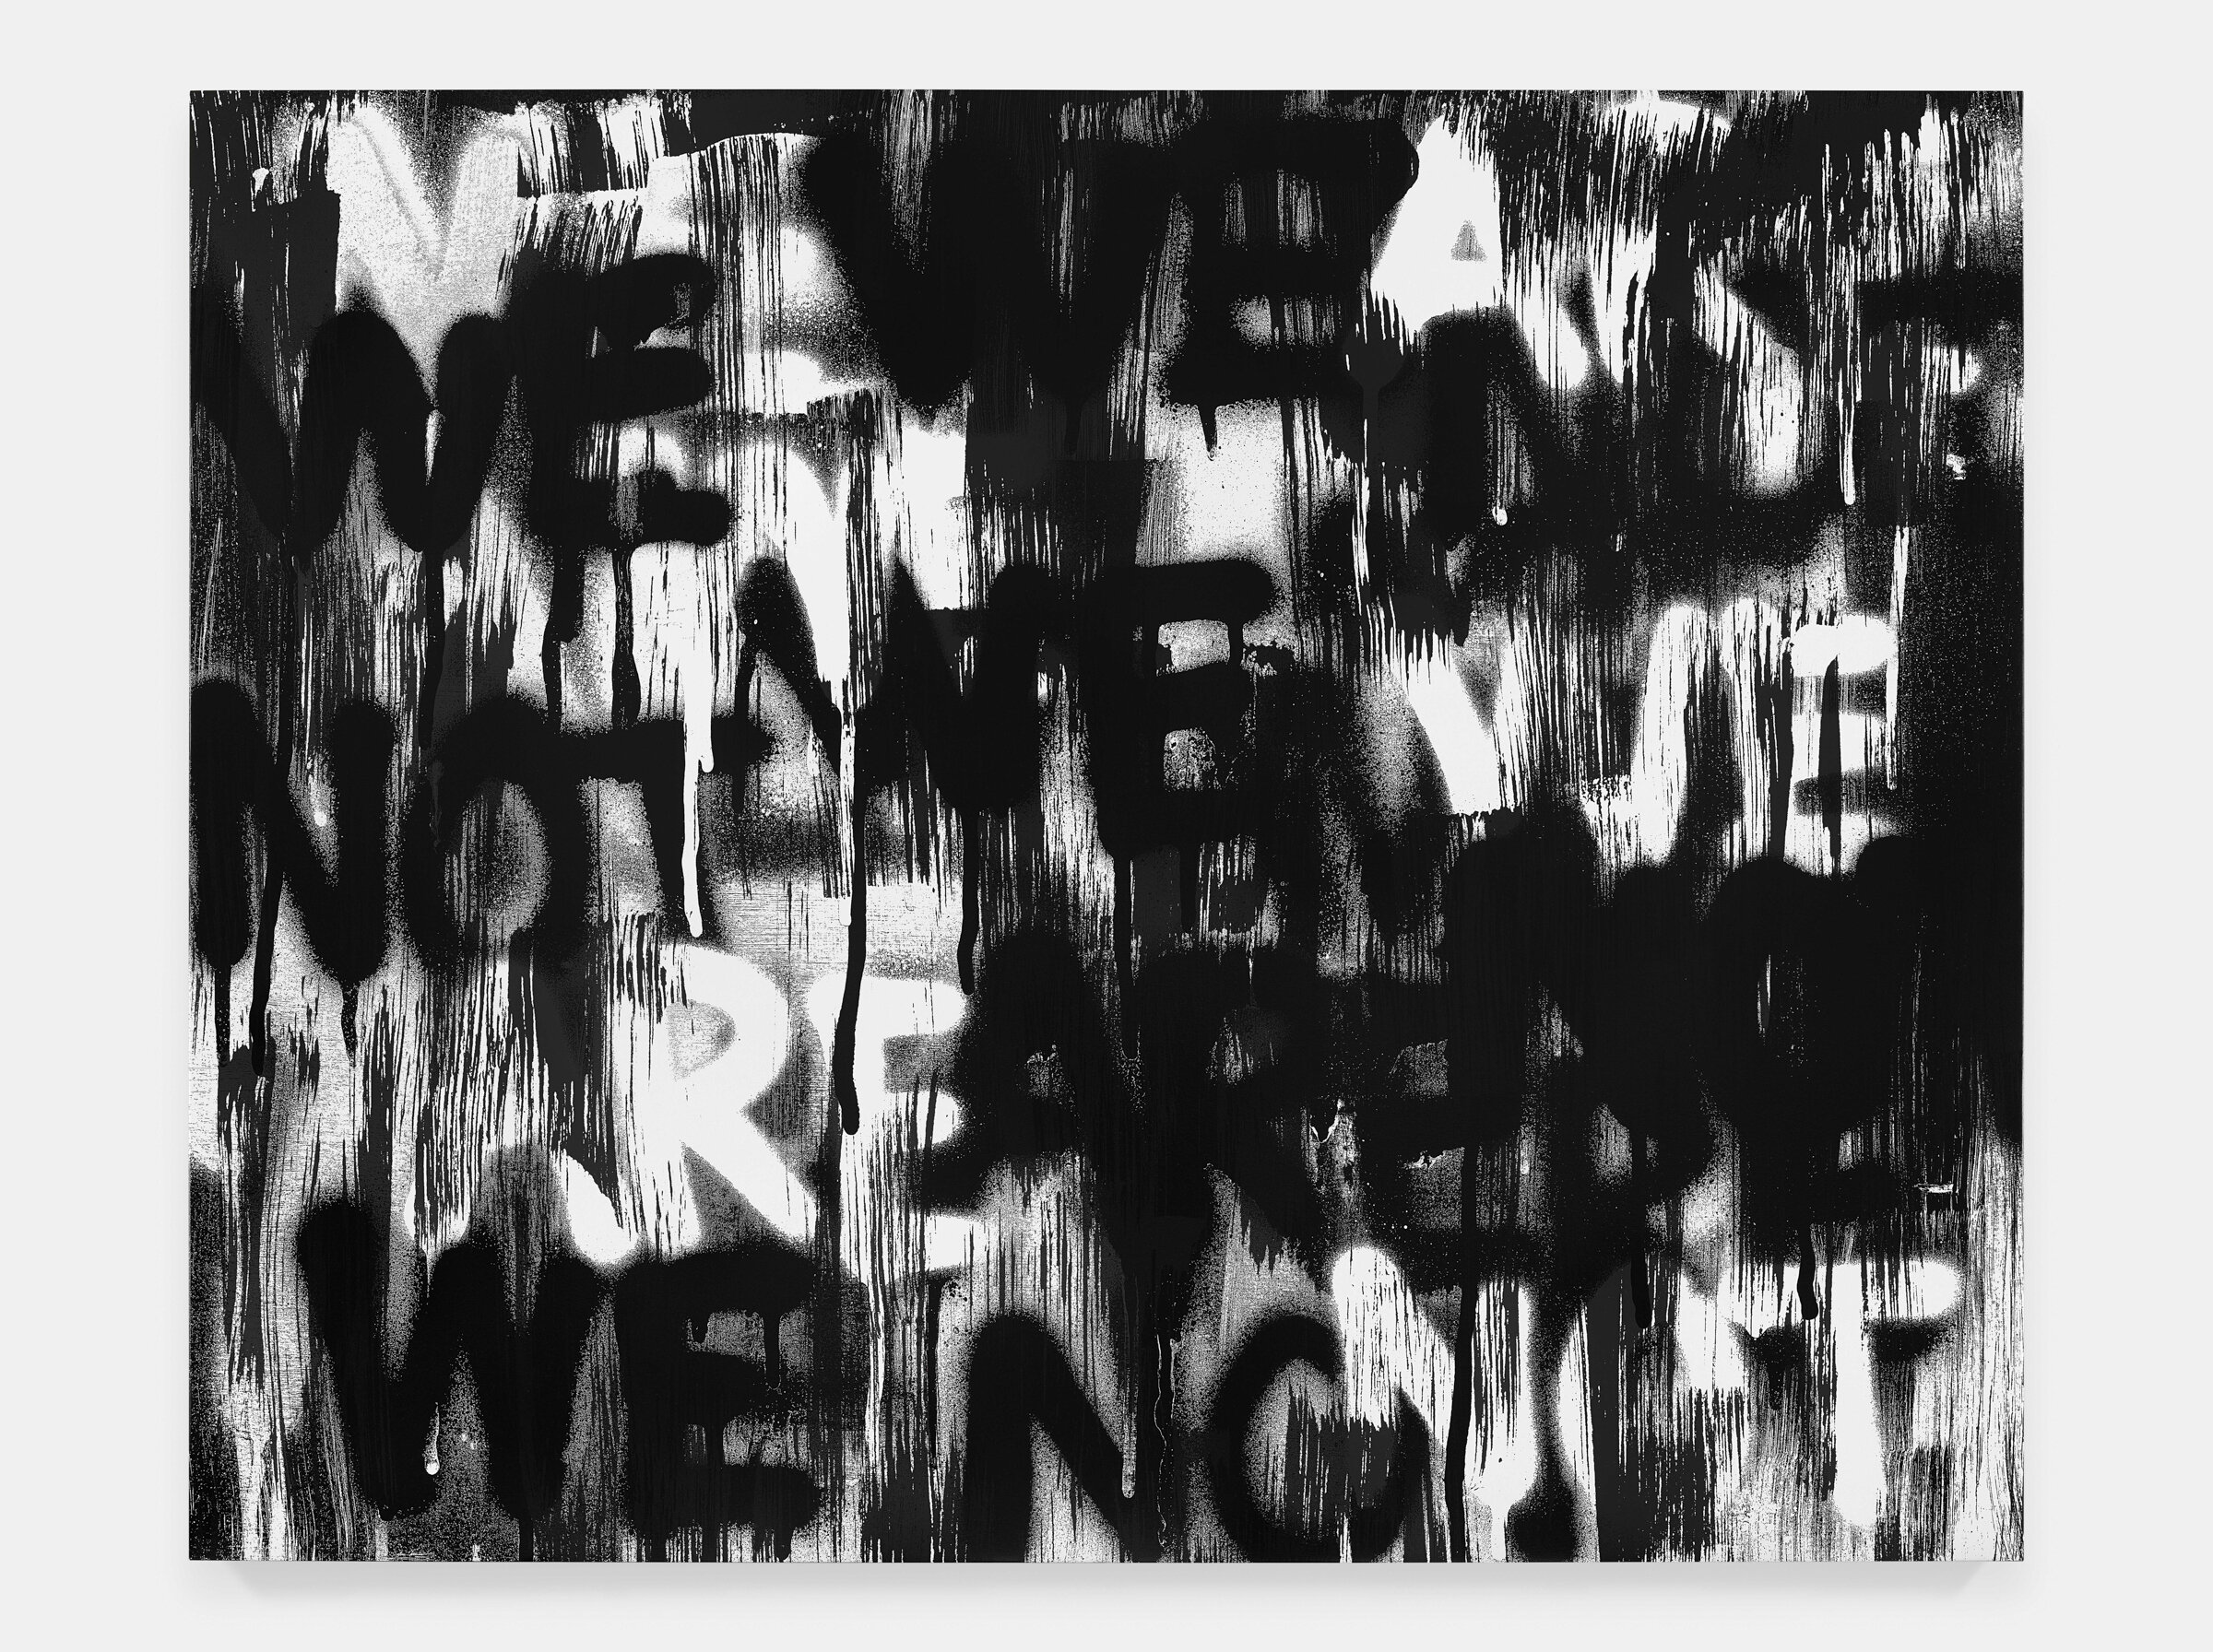 Adam Pendleton. “Untitled (WE ARE NOT)” (2020). Silkscreen ink on canvas. 96” x 120”. Image courtesy of the artist and David Kordansky Gallery.